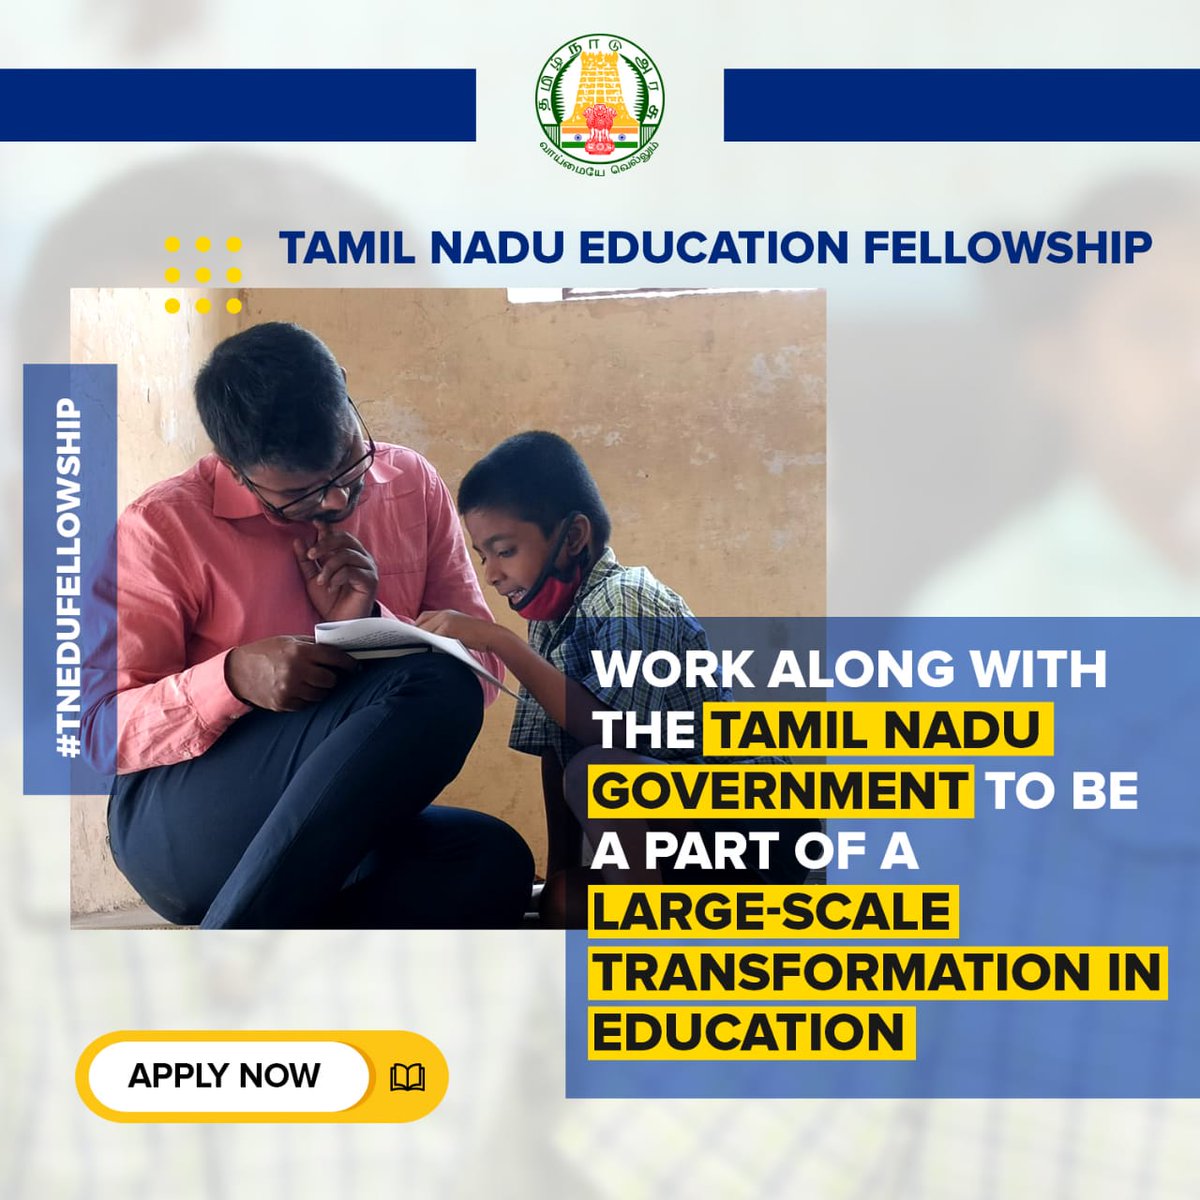 Join the movement to transform the lives of children along with the Tamil Nadu School Education Department To know more->Tamil: bit.ly/3LoEpNl English:bit.ly/3Lq9Oz0 To apply->Application link: bit.ly/3MtofCc #TNEducation #TNSED #TNKalviFellowship